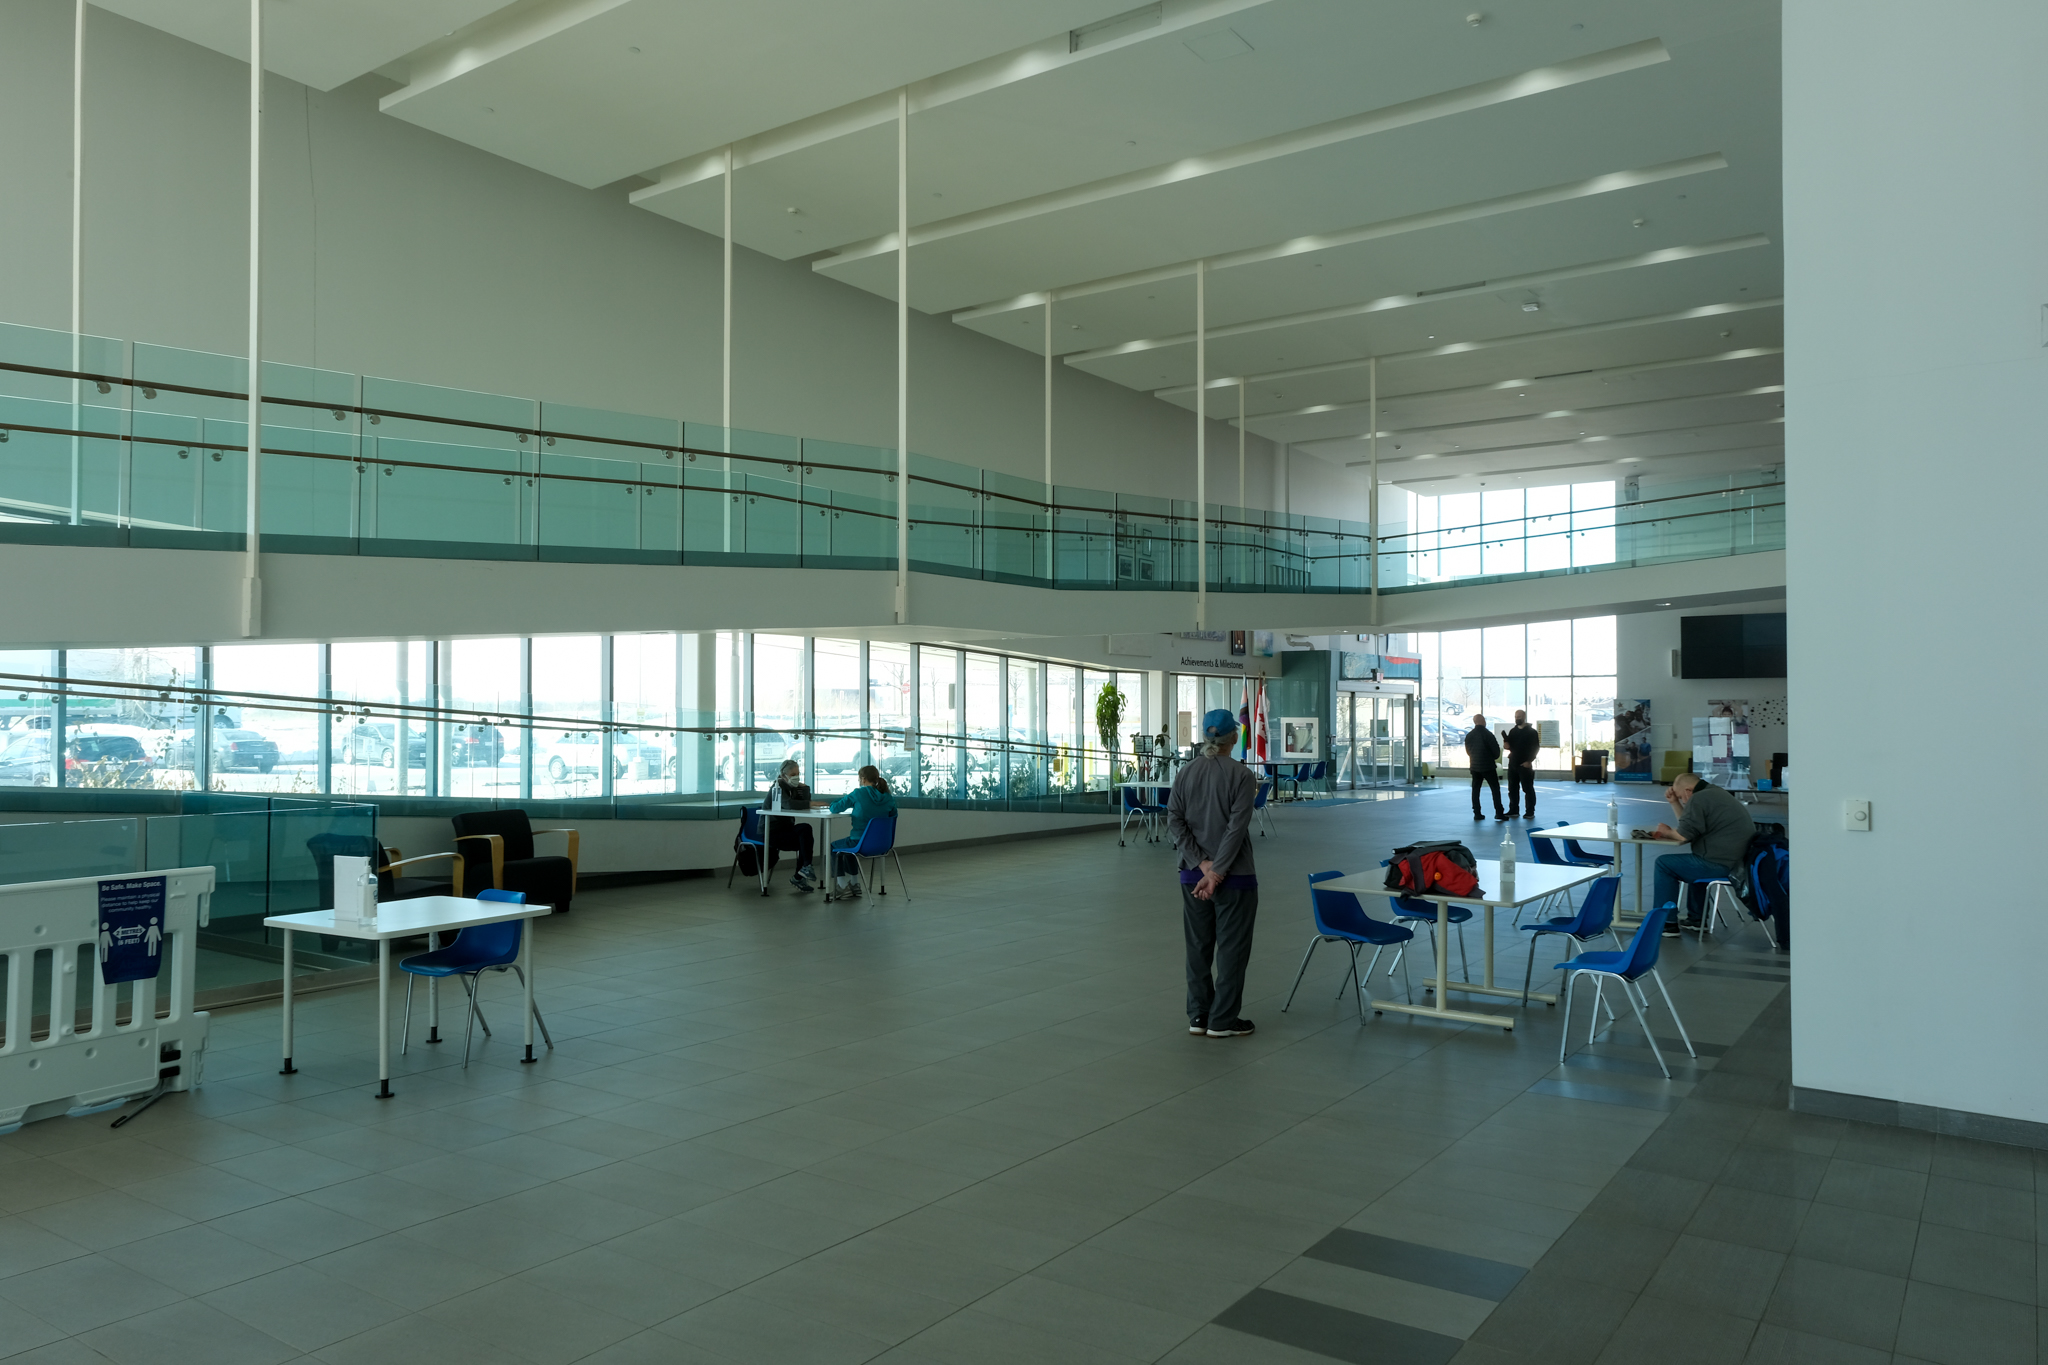 The main entrance of the Abilities Centre taken from the inside.